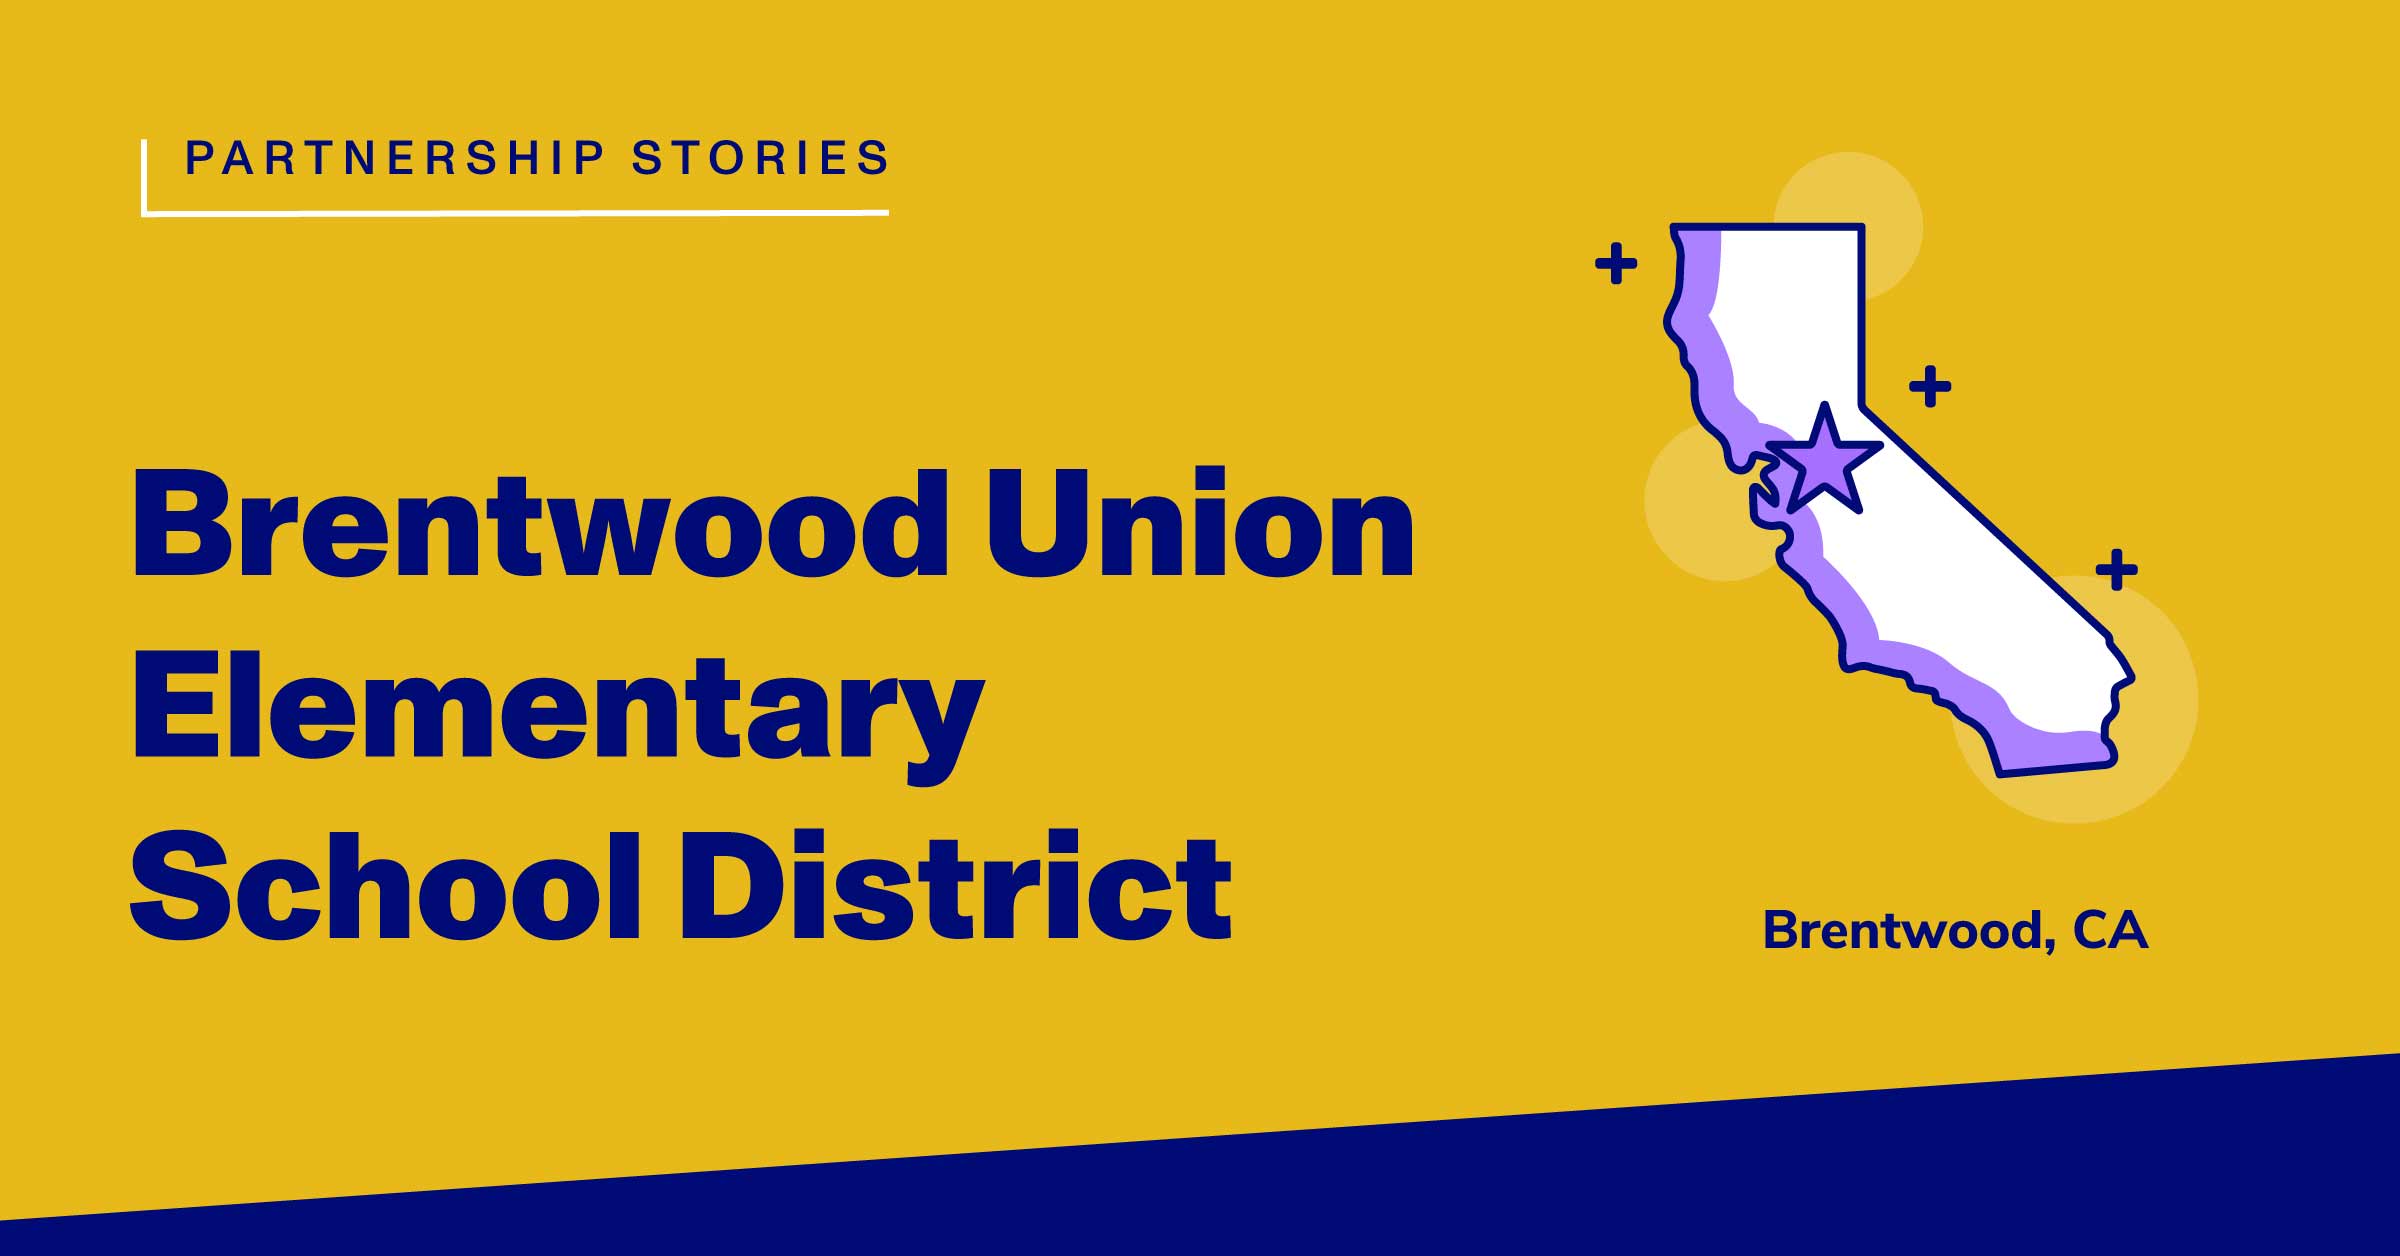 Brentwood Union Elementary School District: Brentwood, California